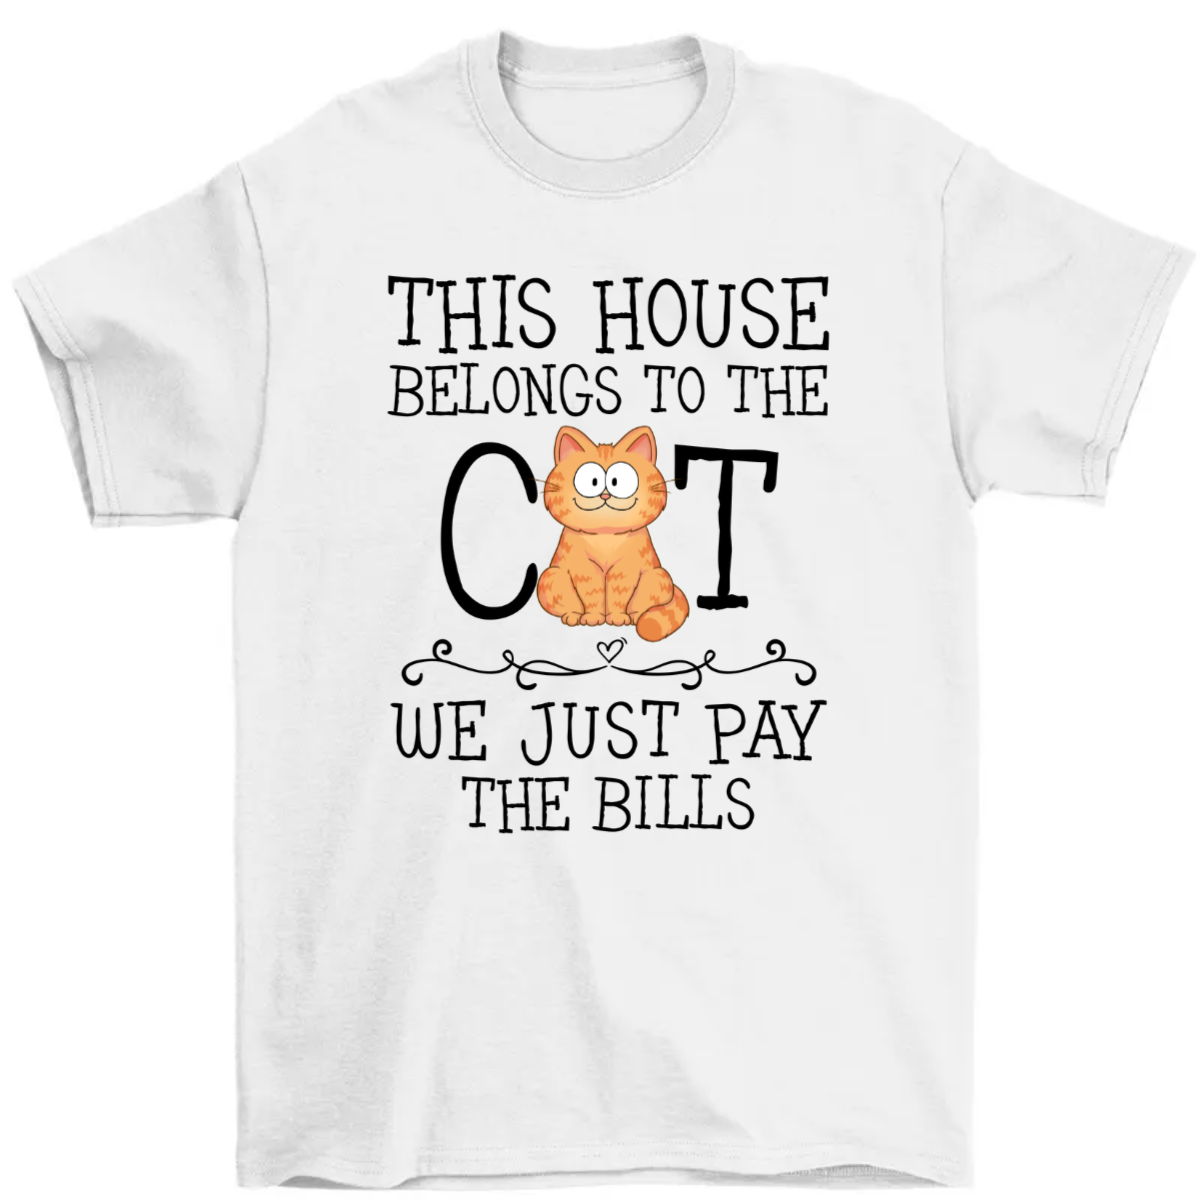 This House Belongs To The Cats Personalized Shirt